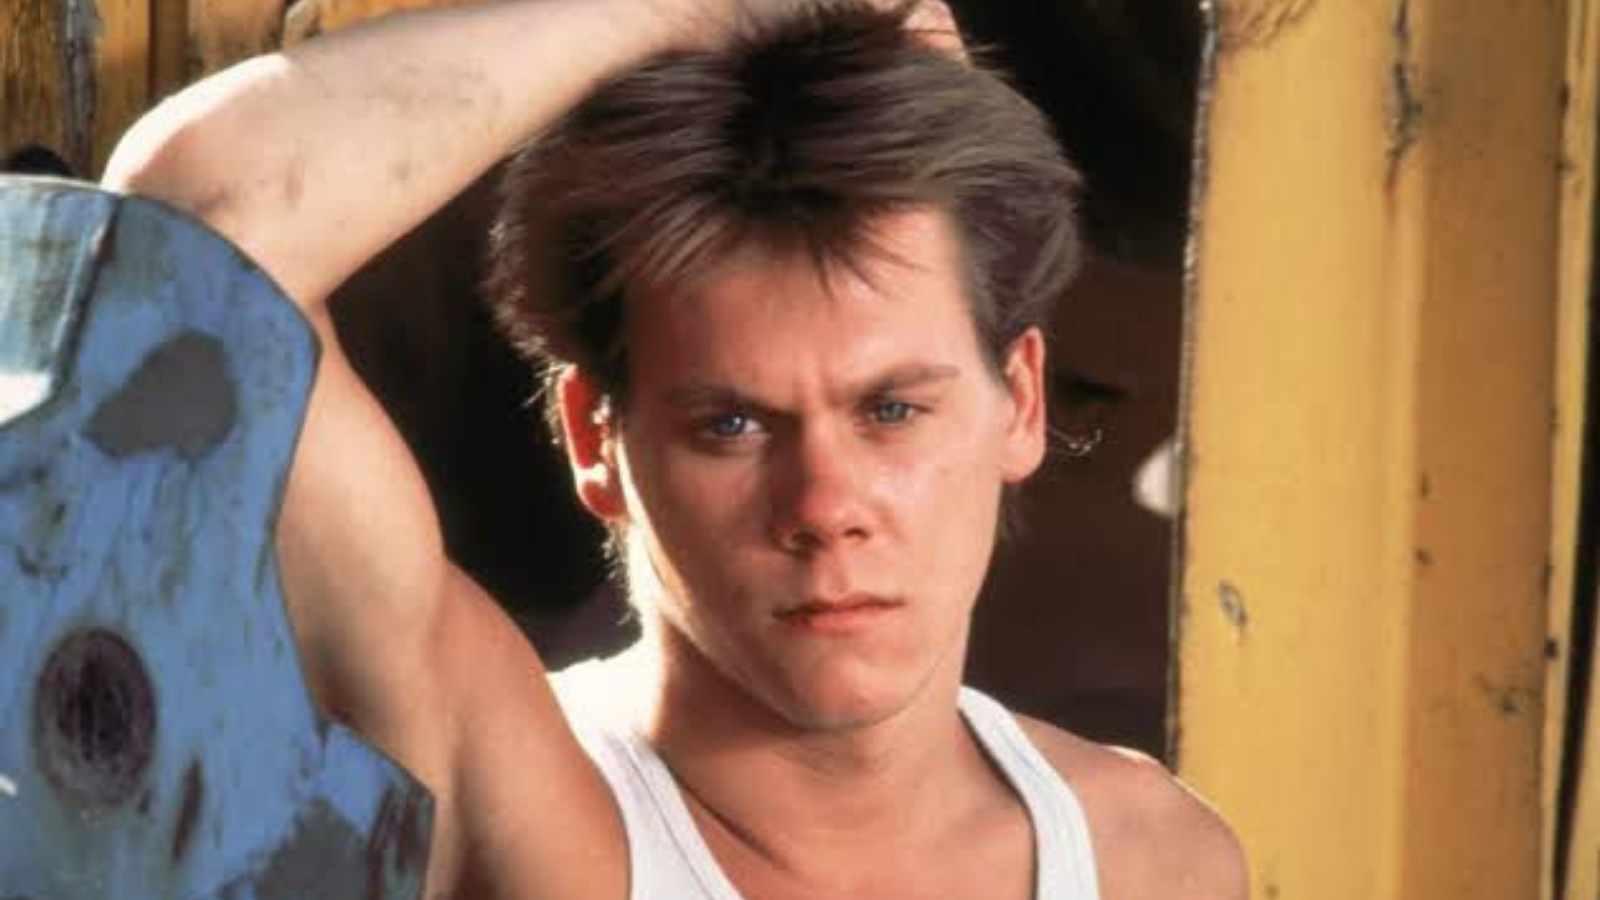 Kevin Bacon didn't know what he was getting himself into when he auditioned for Footloose